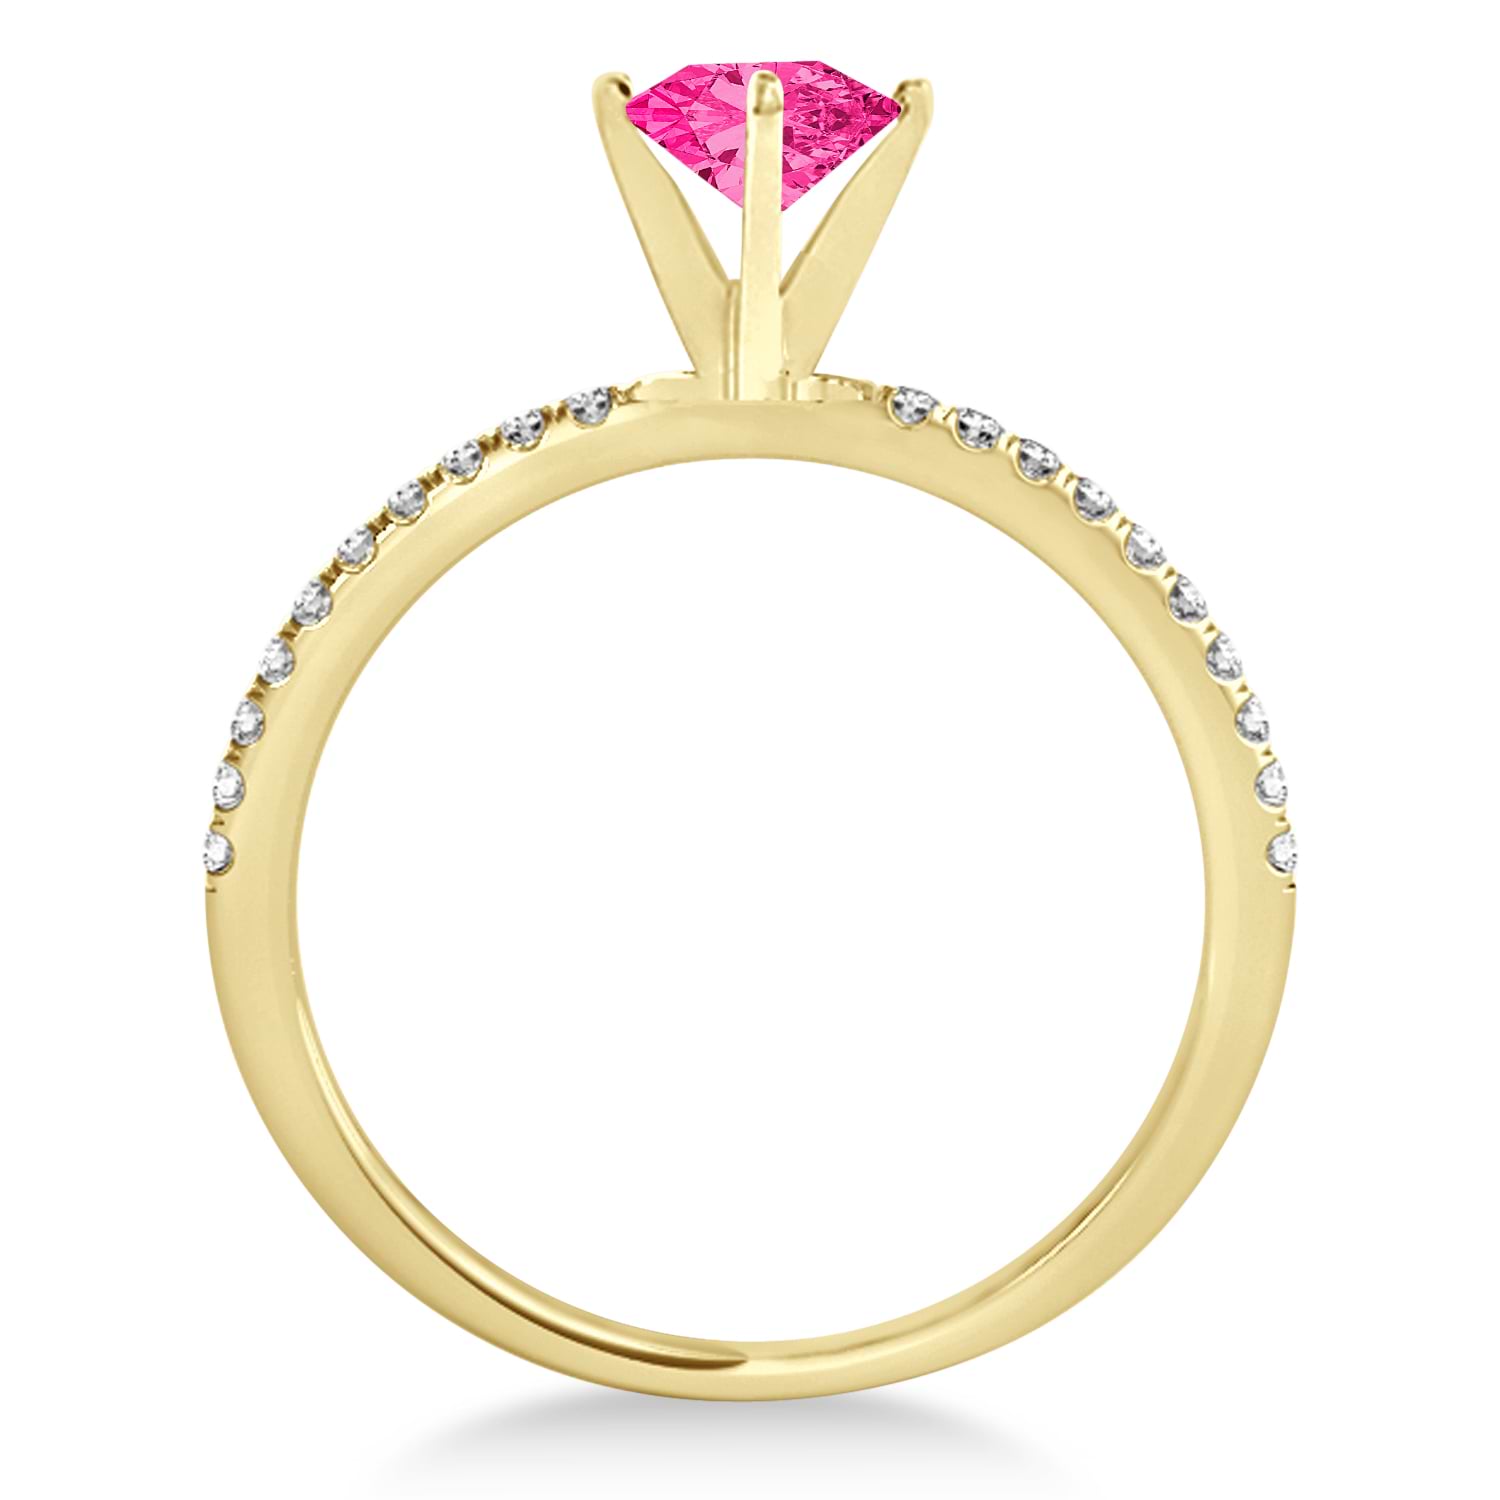 Pink Tourmaline & Diamond Accented Oval Shape Engagement Ring 14k Yellow Gold (1.50ct)